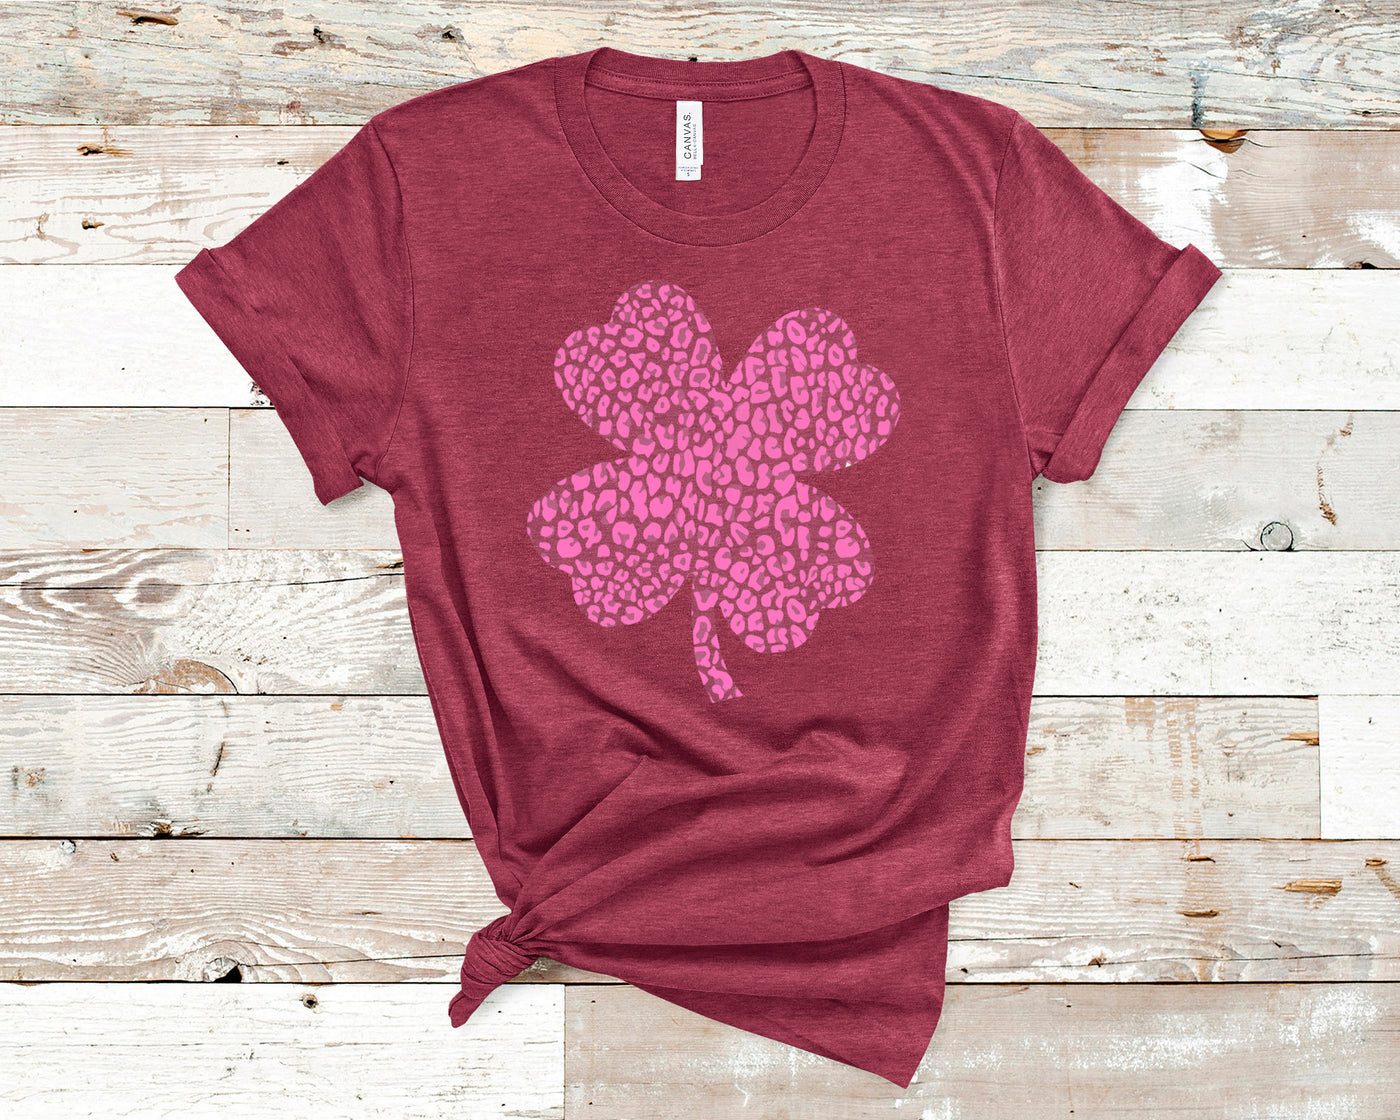 Raspberry tee with a pink leopard print 4 leaf clover